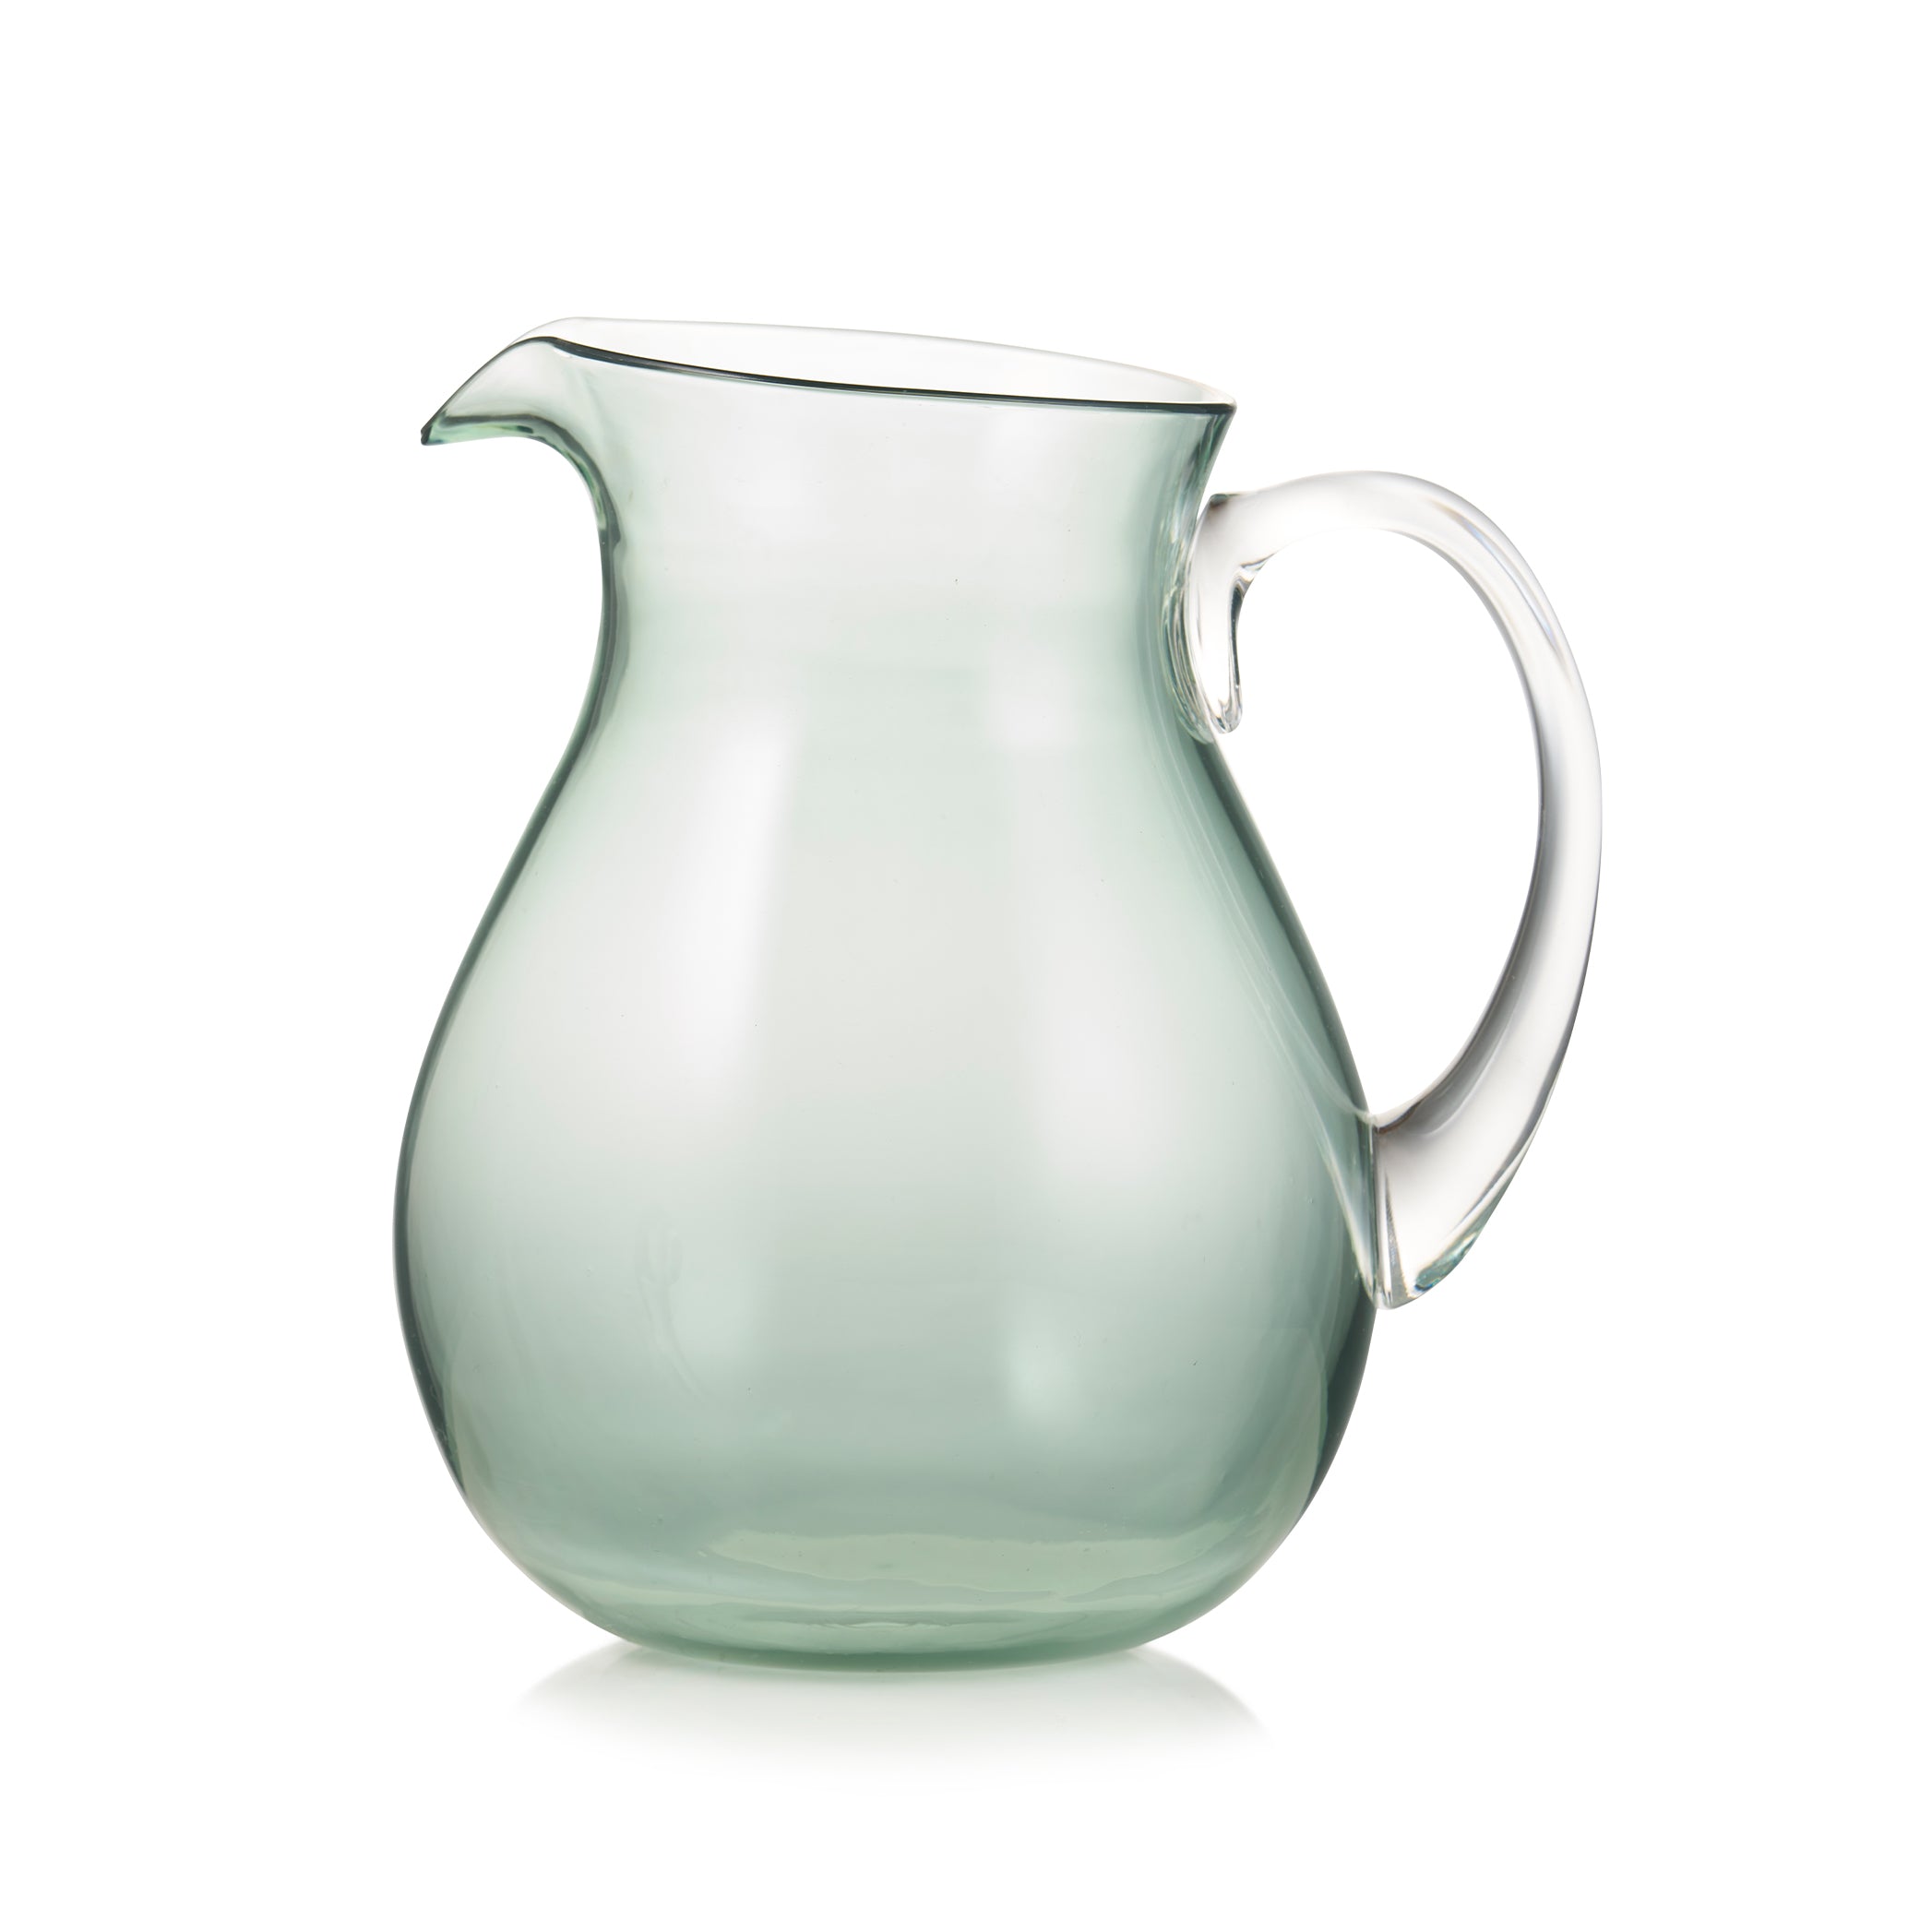 Recyclable Plastic Bobby Pitcher in Teal Blue